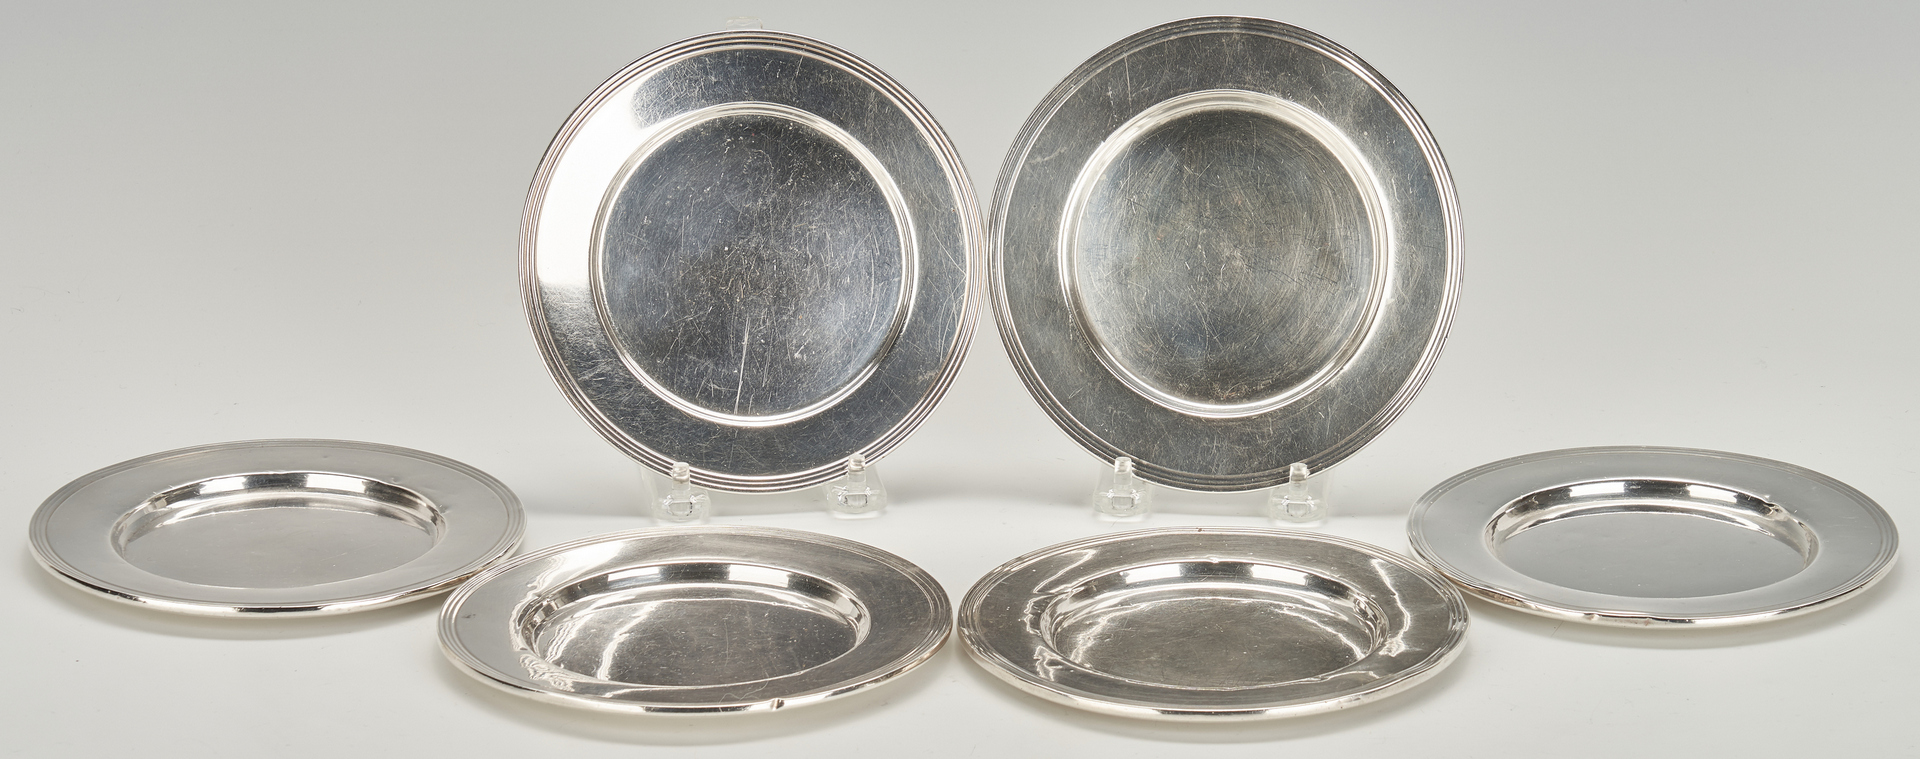 Lot 807: 11 pcs  Holloware: Bread Plates, Kirk candy dishes